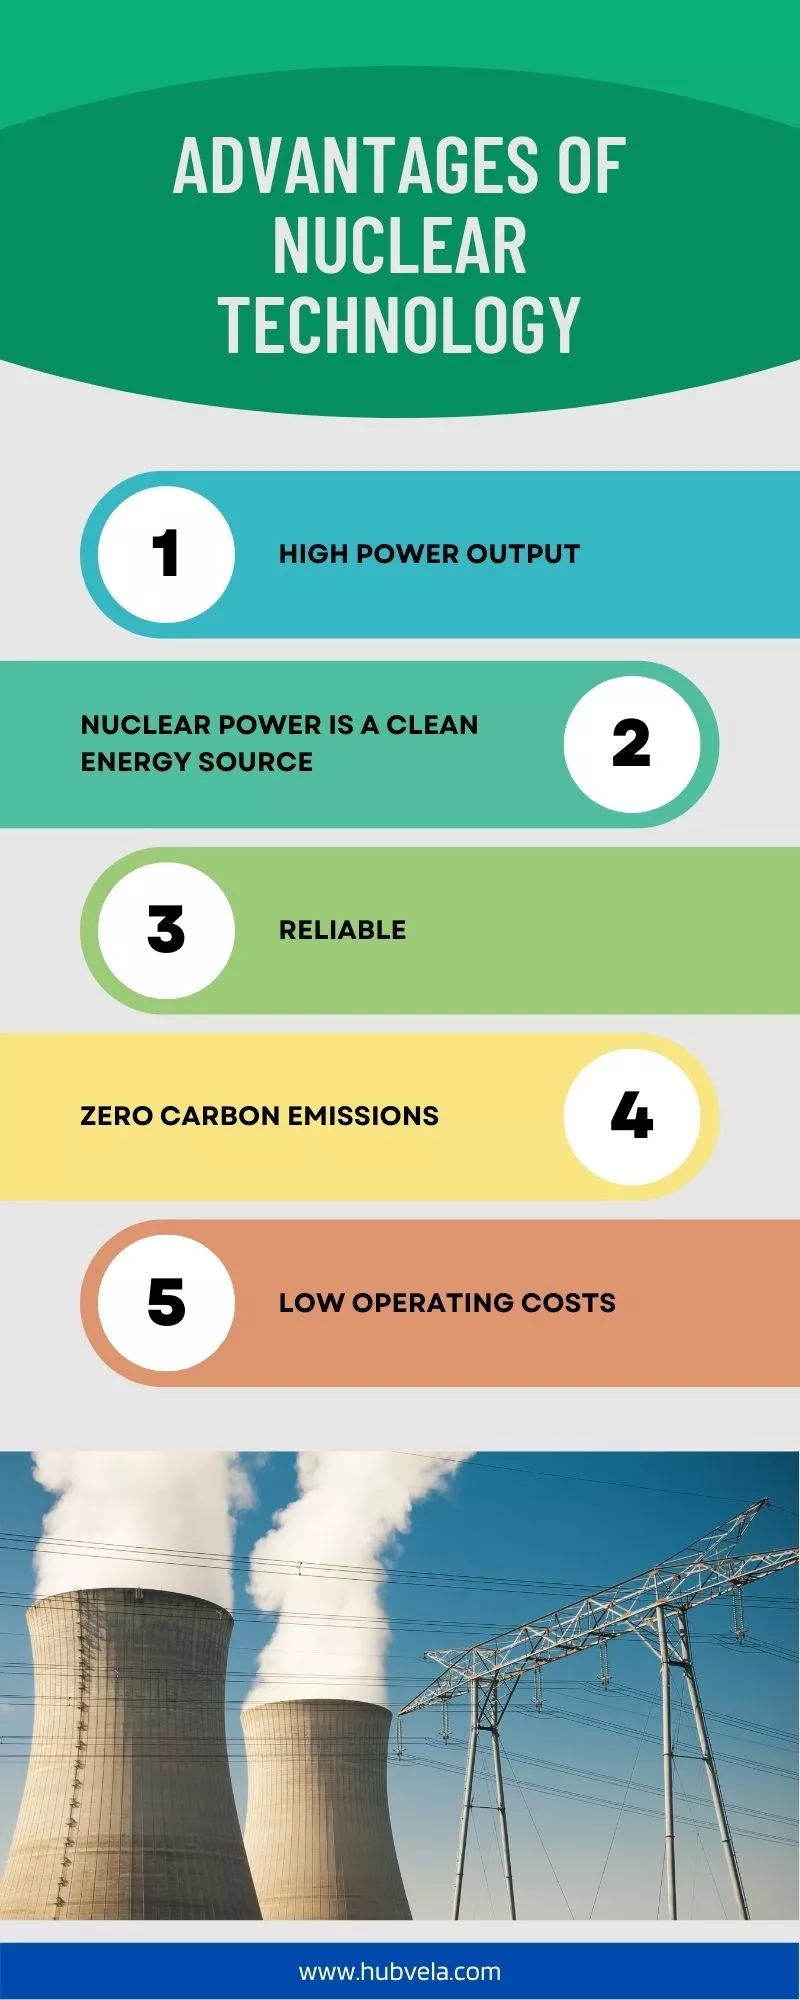 Advantages of Nuclear Technology Infographic